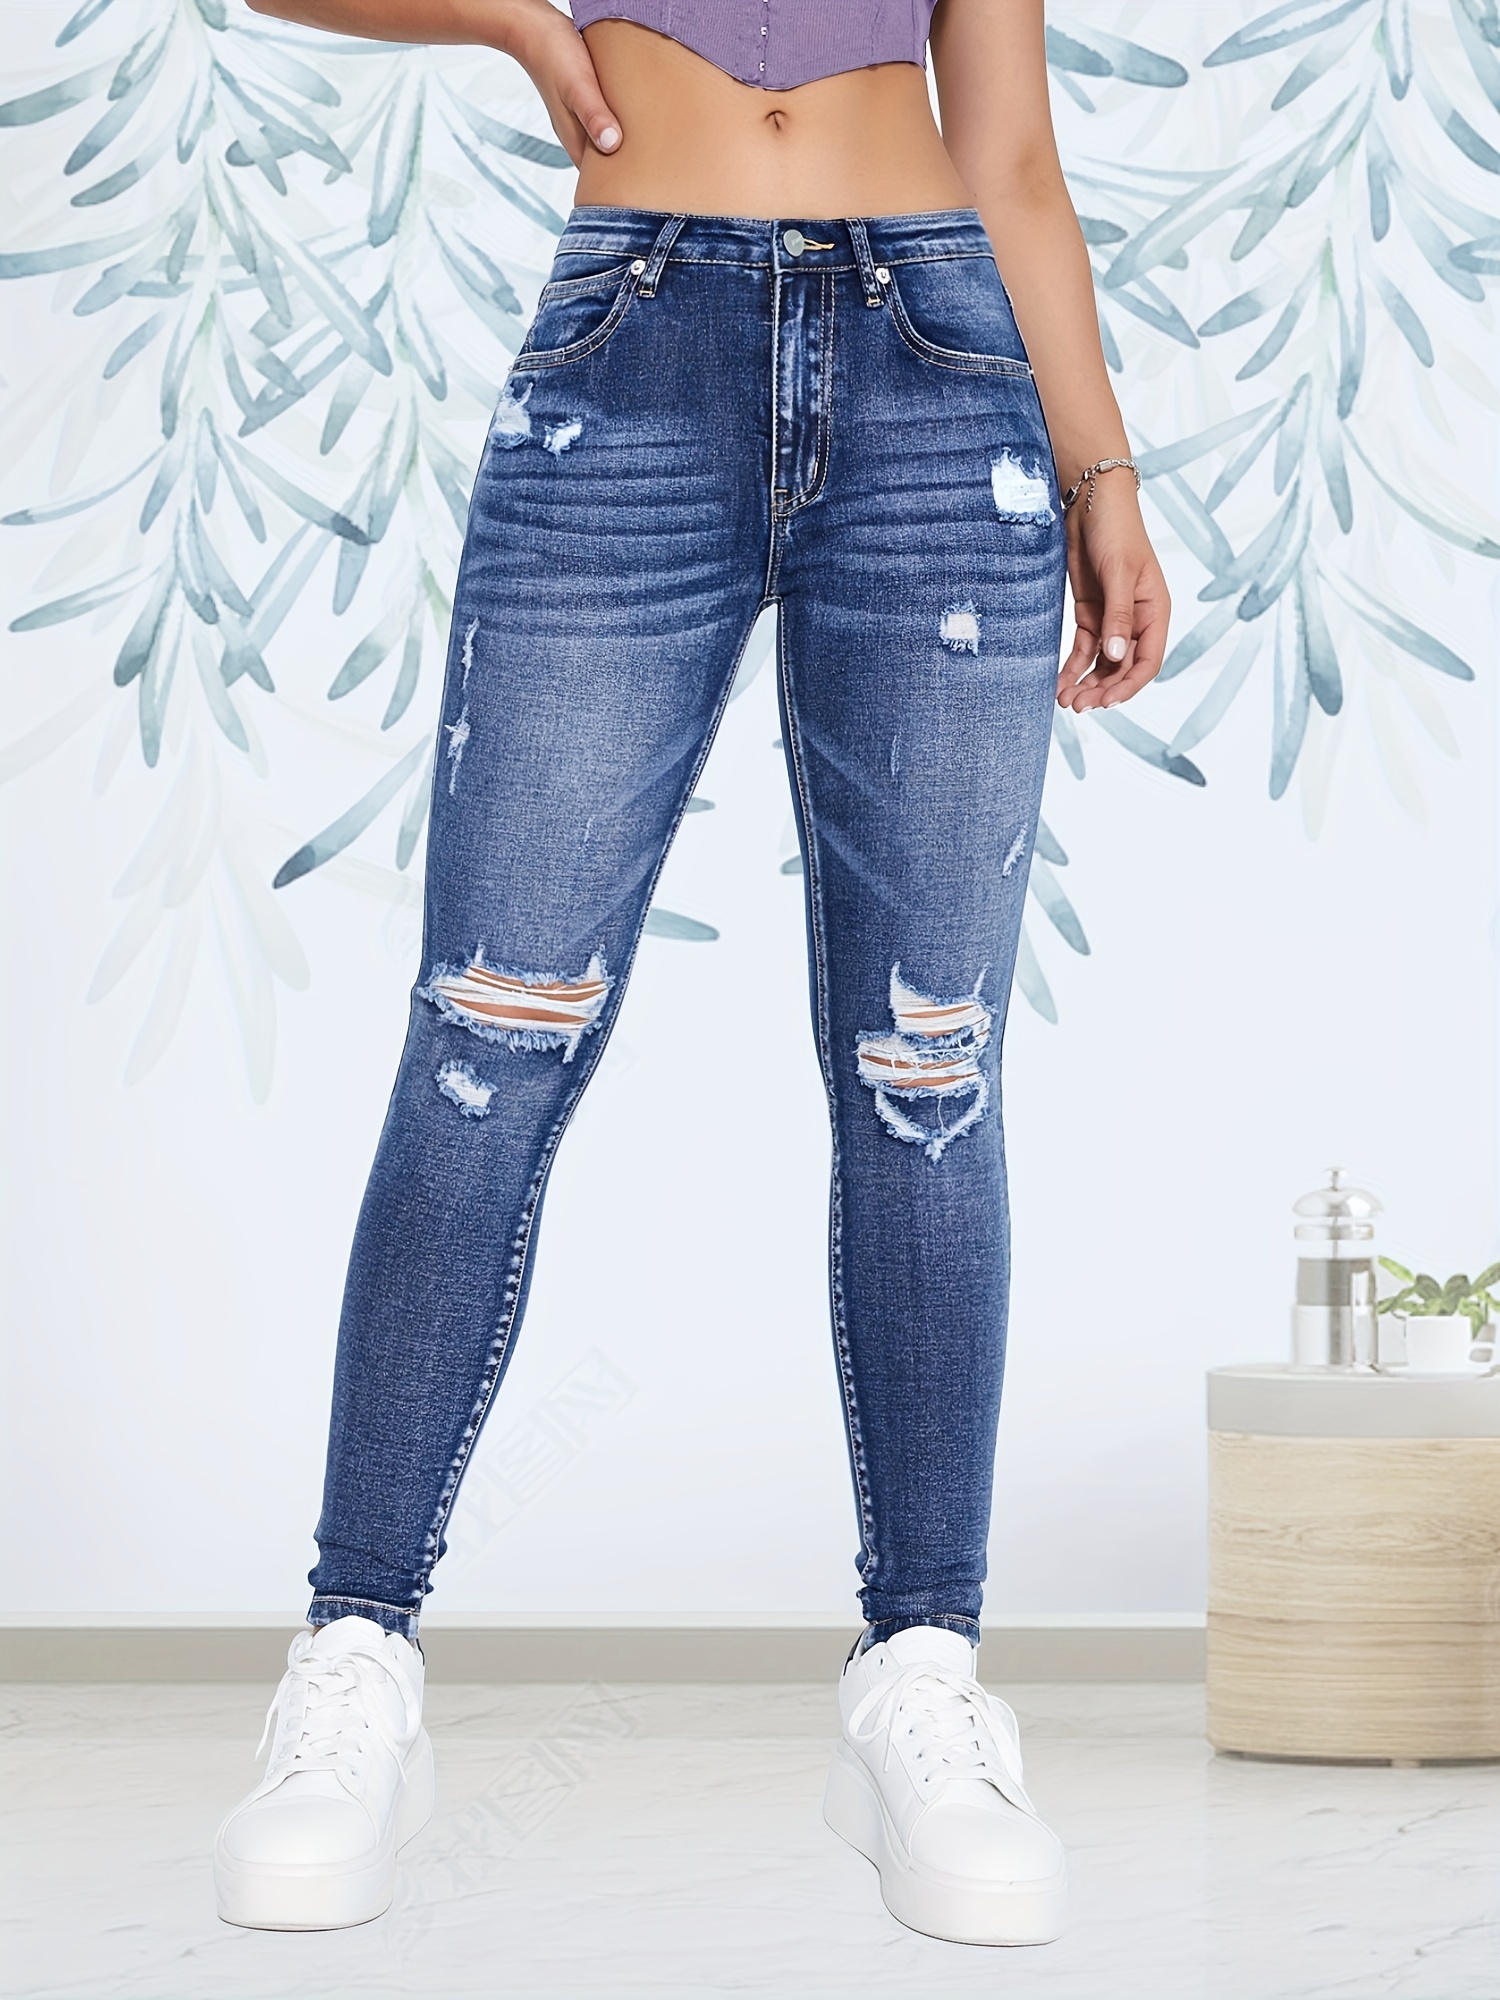 Ripped Holes Washed Skinny Jeans, Slim Fit High Stretch Distressed Tight  Jeans, Women's Denim Jeans & Clothing